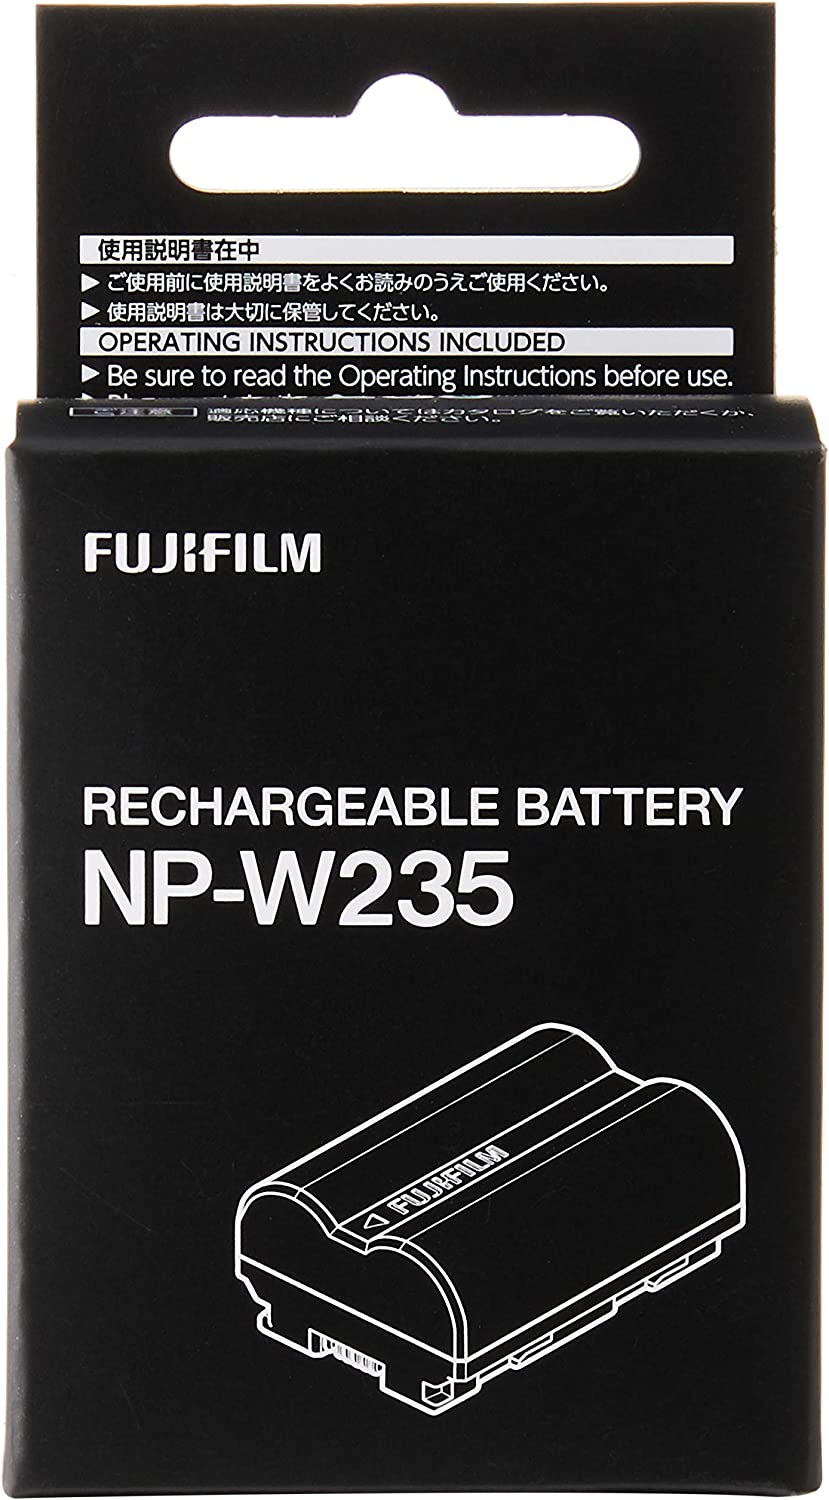 Fujifilm Lithium-Ion Battery NP-W235 For X-T4 X-T5 Cameras